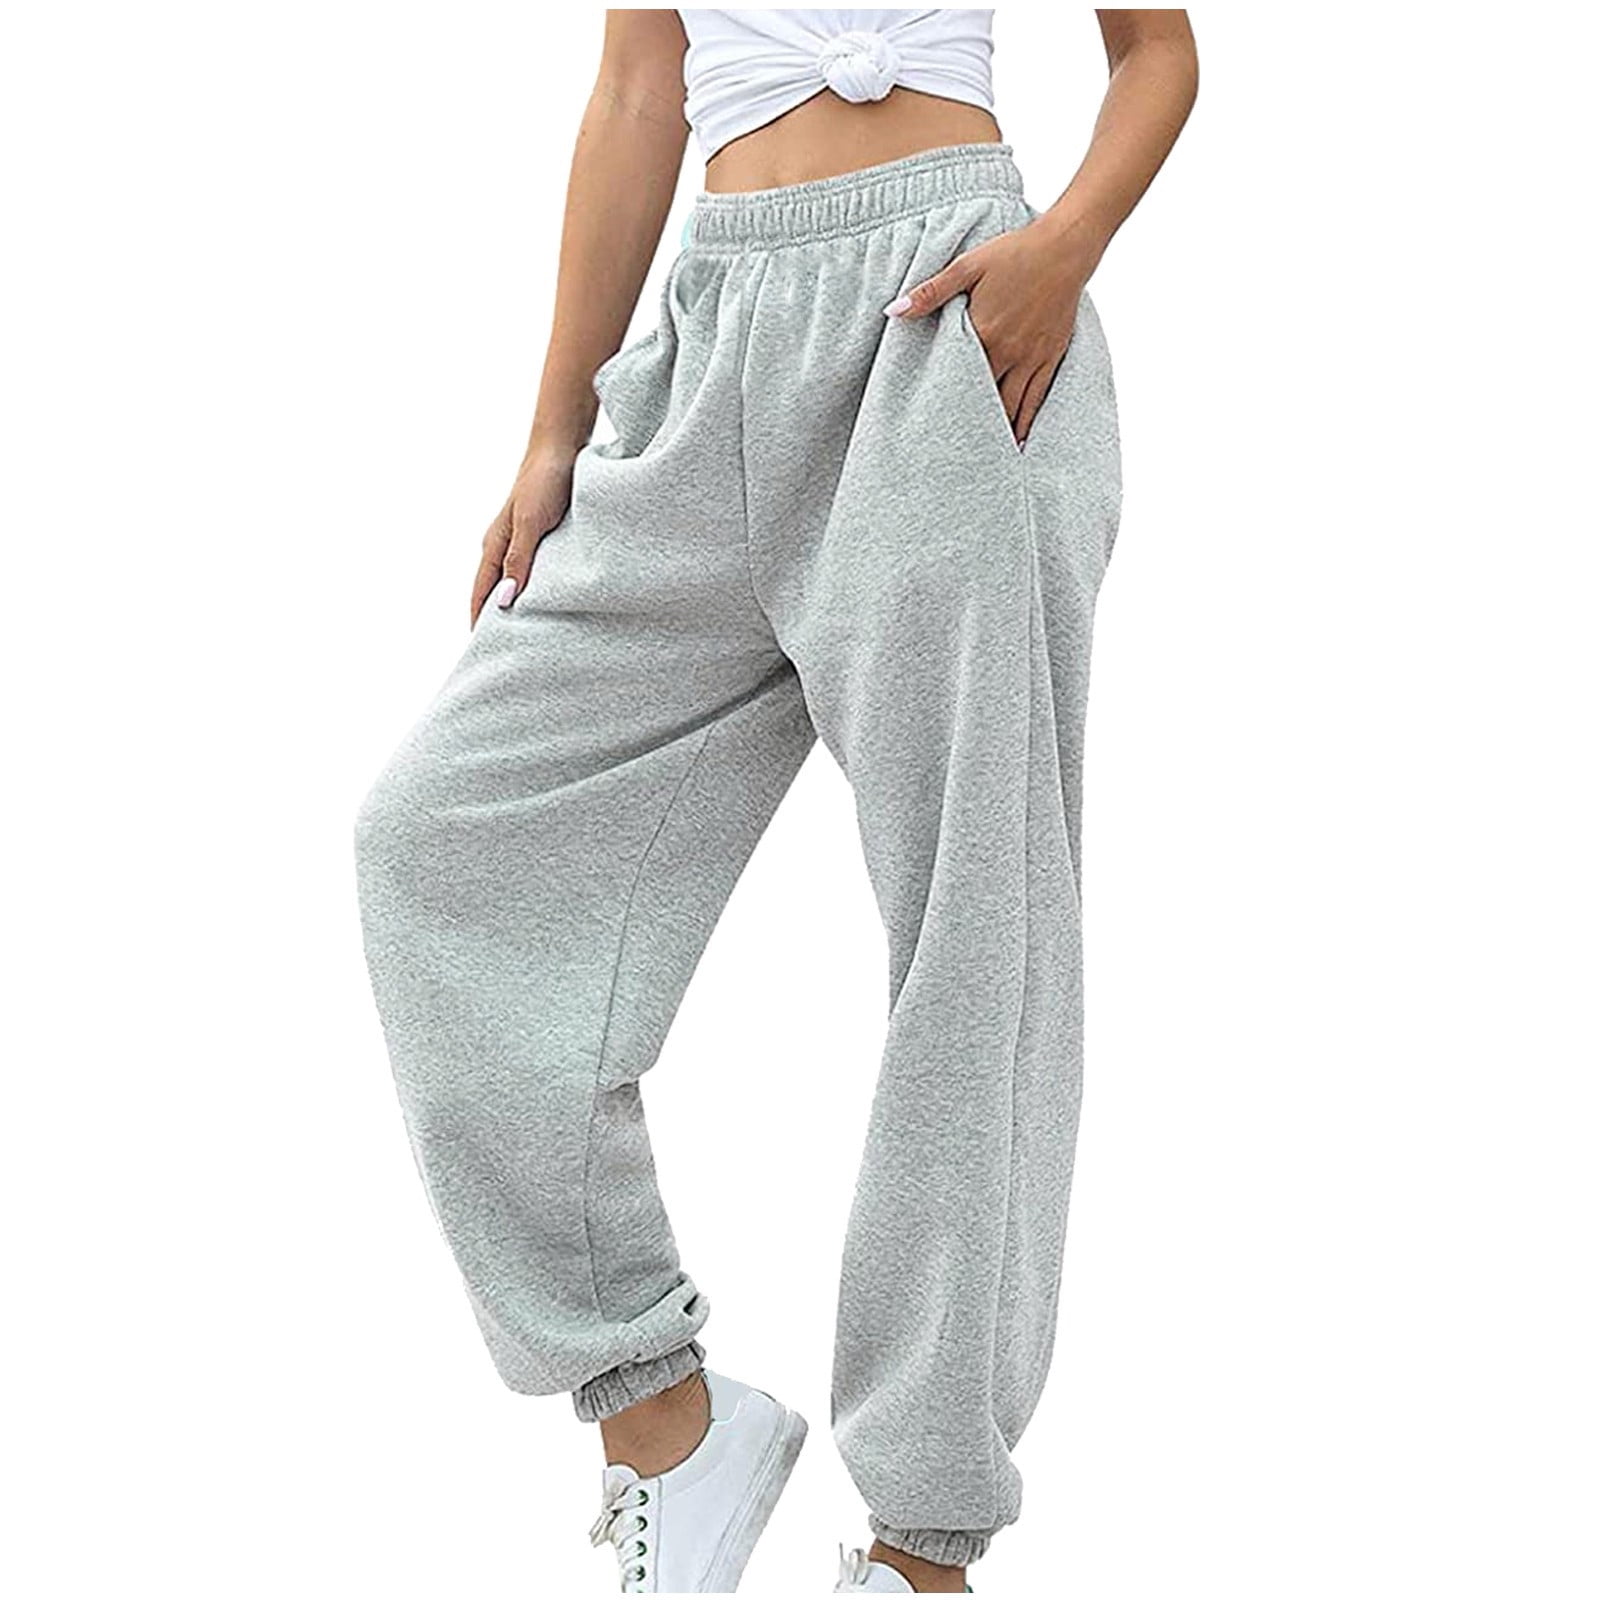 Women's Bottom Sweatpants Joggers Pants Workout High Waisted Yoga Lounge  Pants With Pockets Short Damaged Pants for Women Dark Gray S